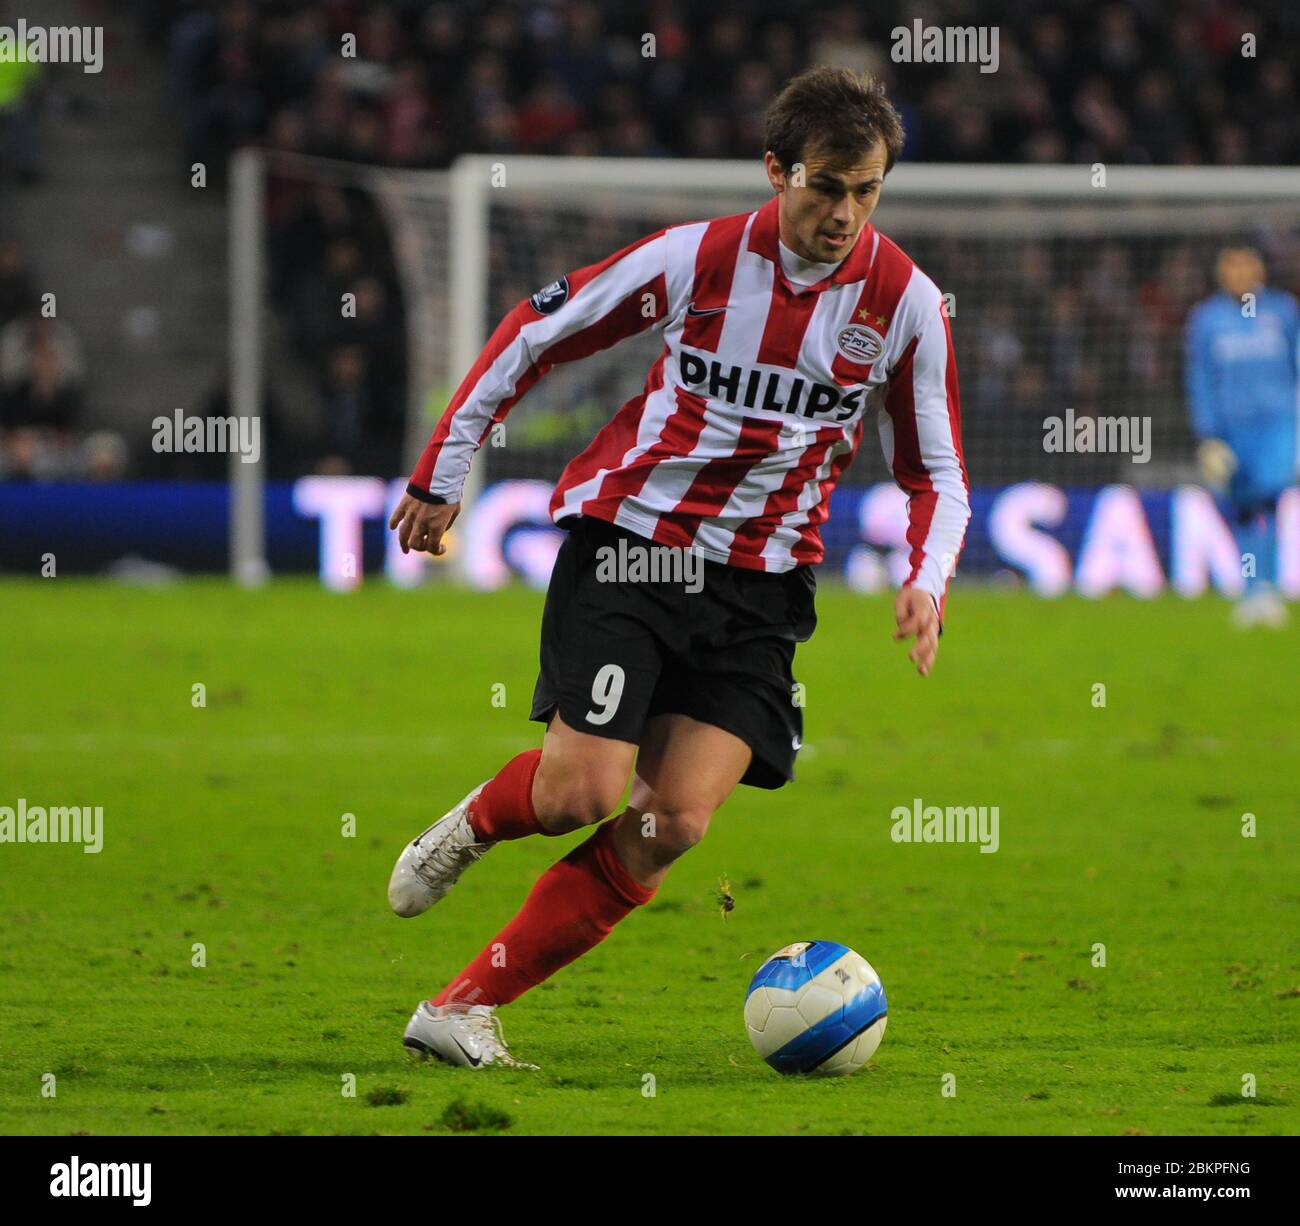 EINDHOVEN, NEDERLAND. MARCH 12: Danko Lazovic of PSV Eindhoven During UEFA Cup Round of 16 Second Leg between PSV Eindhoven and Tottenham Hotspur at Stock Photo